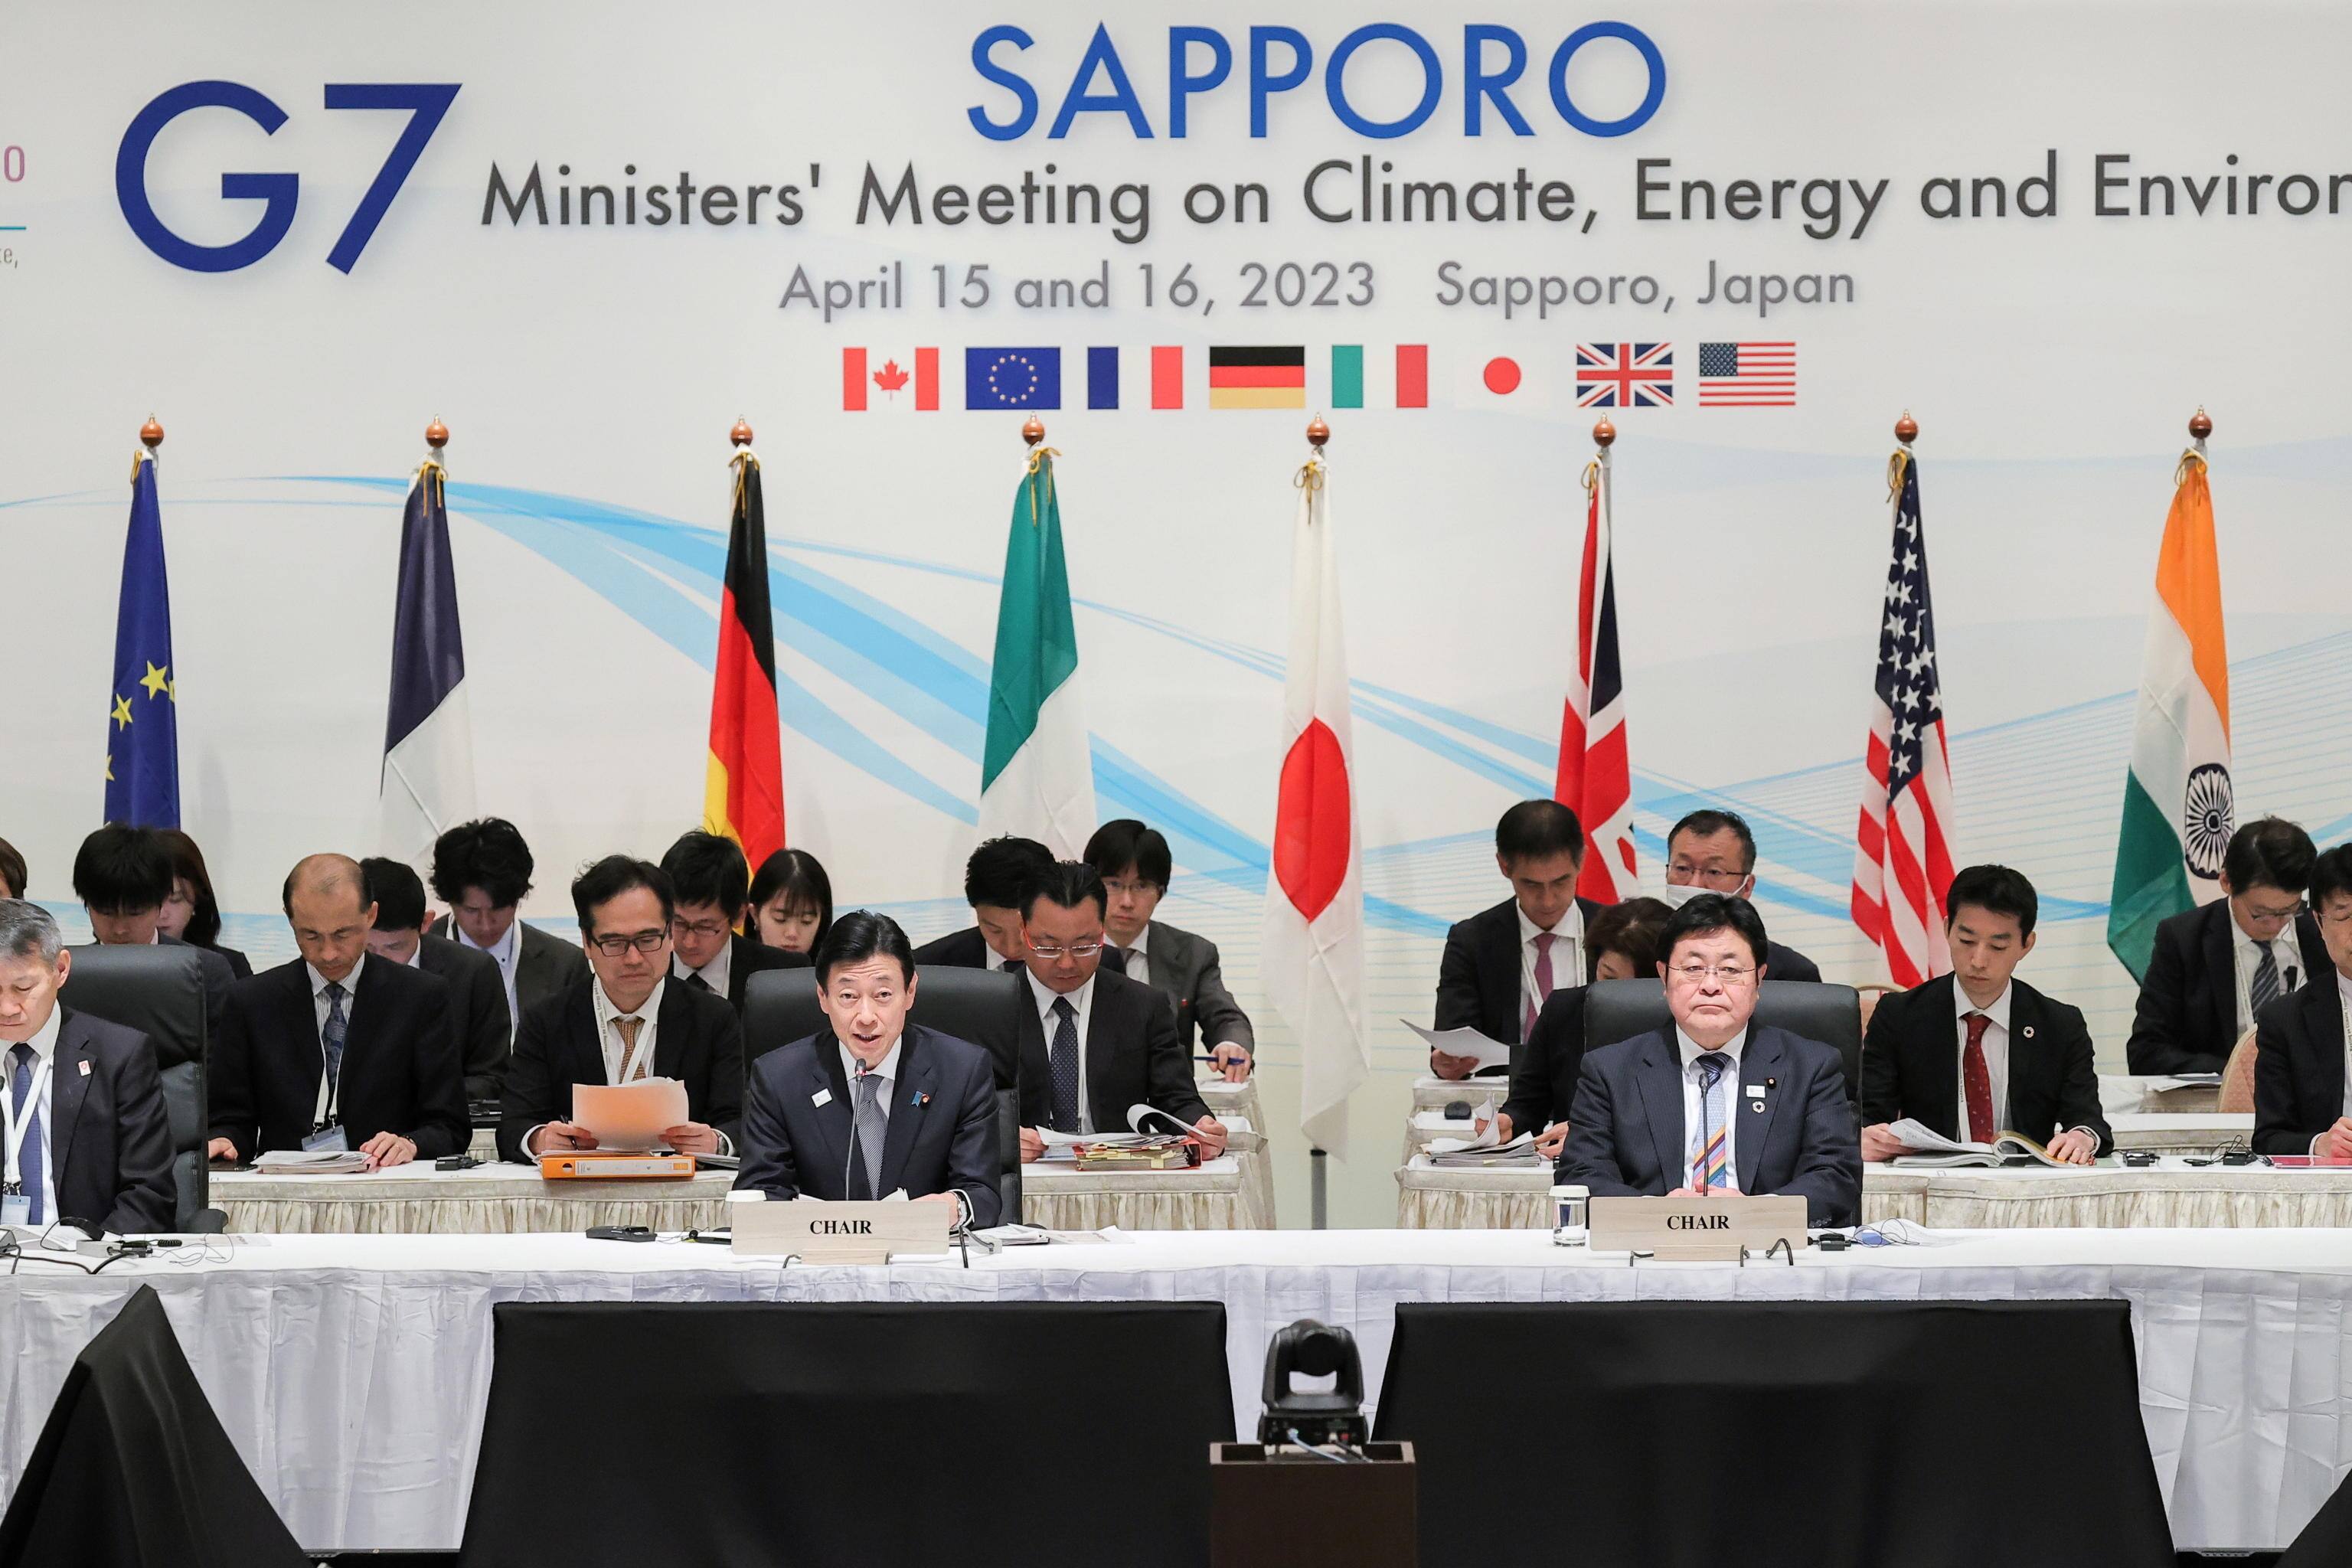 Japan s Economy Minister Yasutoshi Nishimura (L) and Environment Minister Akihiro Nishimura attend the G7 Ministers' Meeting on Climate, Energy and Environment meeting in Sapporo, northern Japan, 15 April 2023. ANSA/JIJI PRESS JAPAN OUT EDITORIAL USE ONLY/